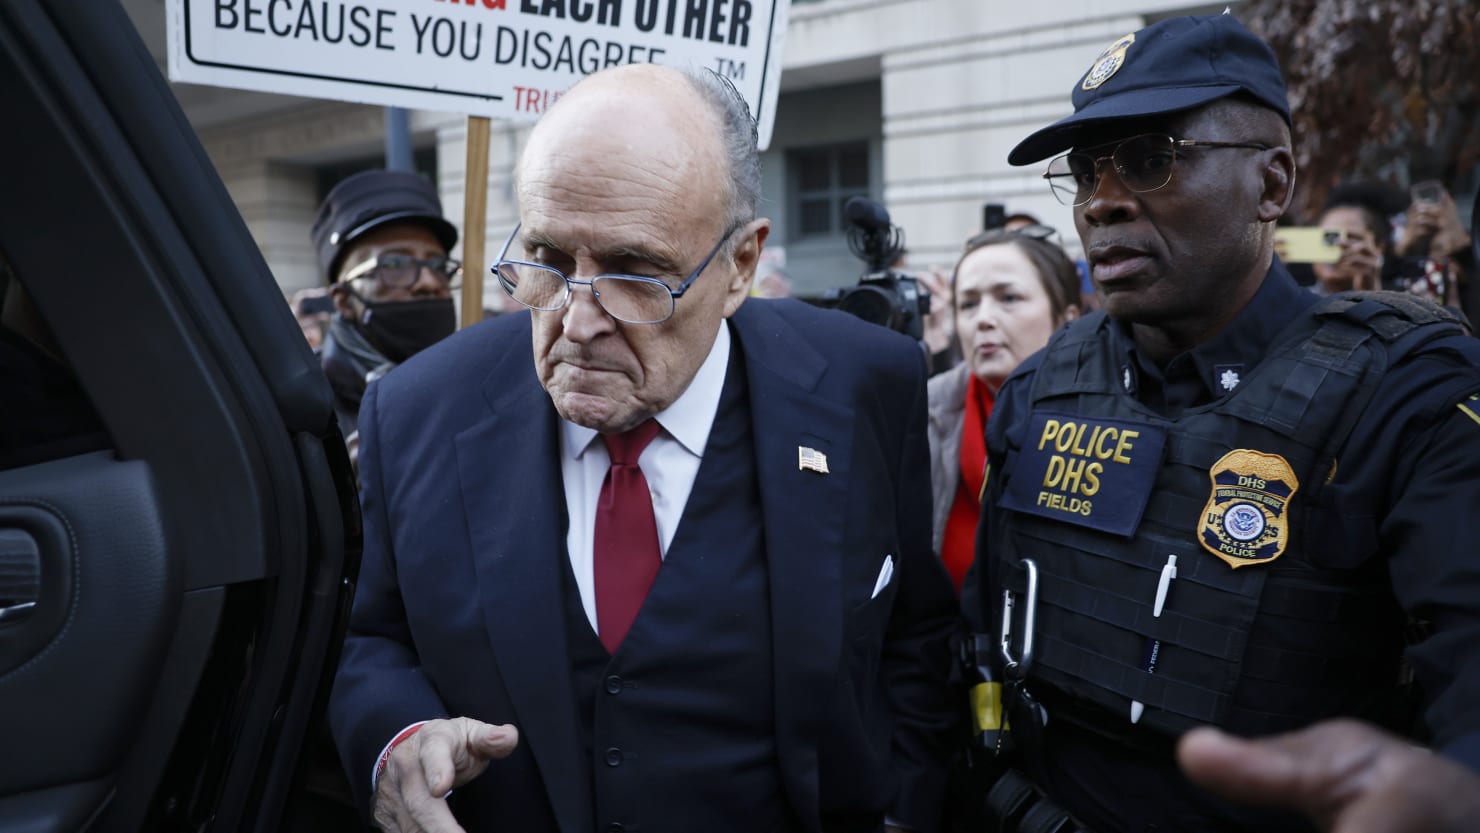 Report: Giuliani Complains to Friends About Feeling Trapped in a ‘Nightmare World’